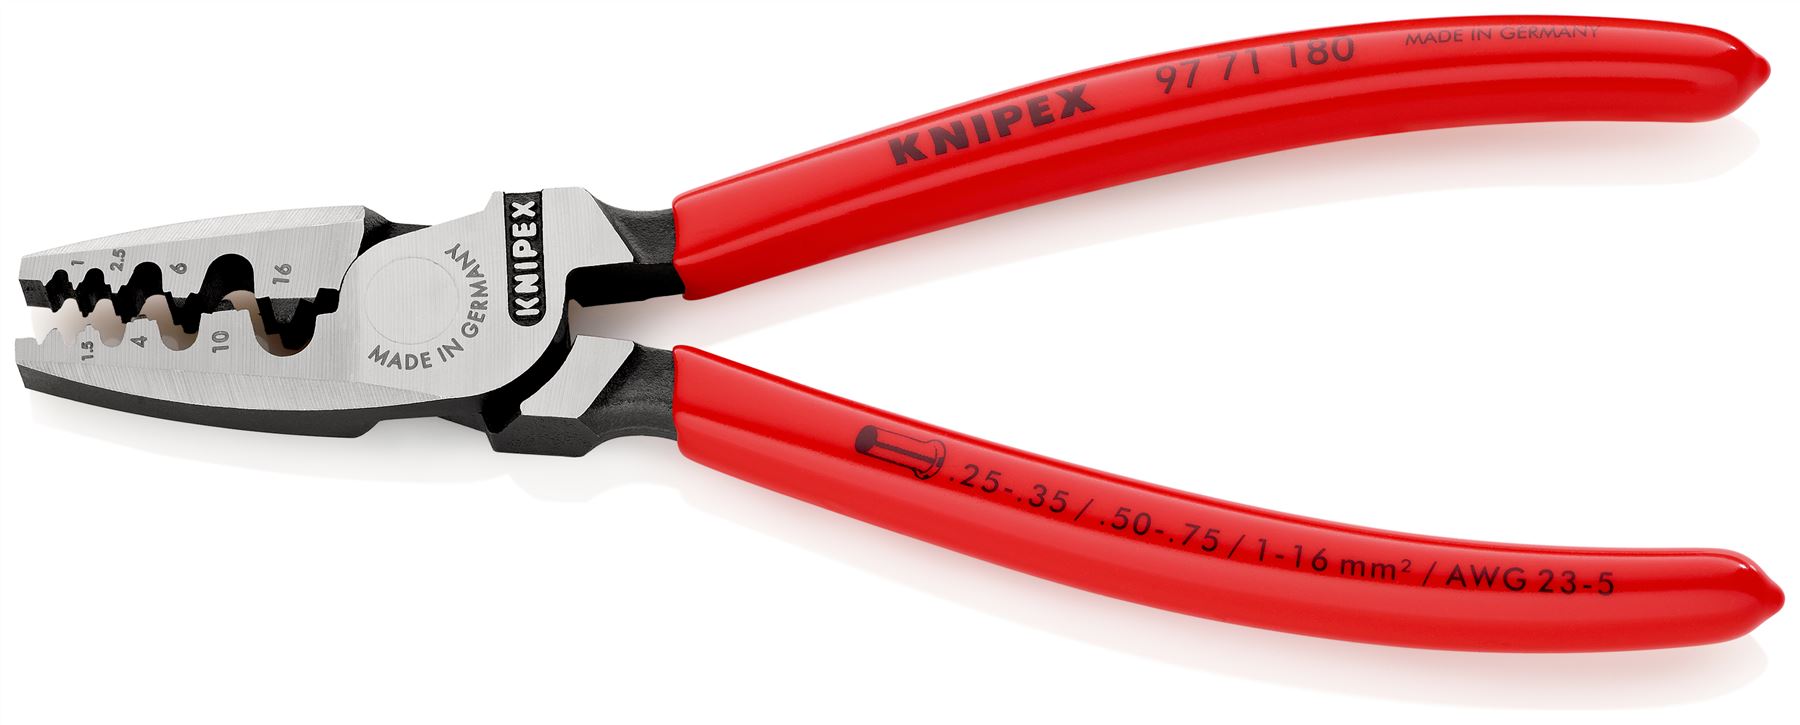 Knipex Crimping Pliers for Wire Ferrules 180mm 0.25-16mm² Capacity 97 71 180